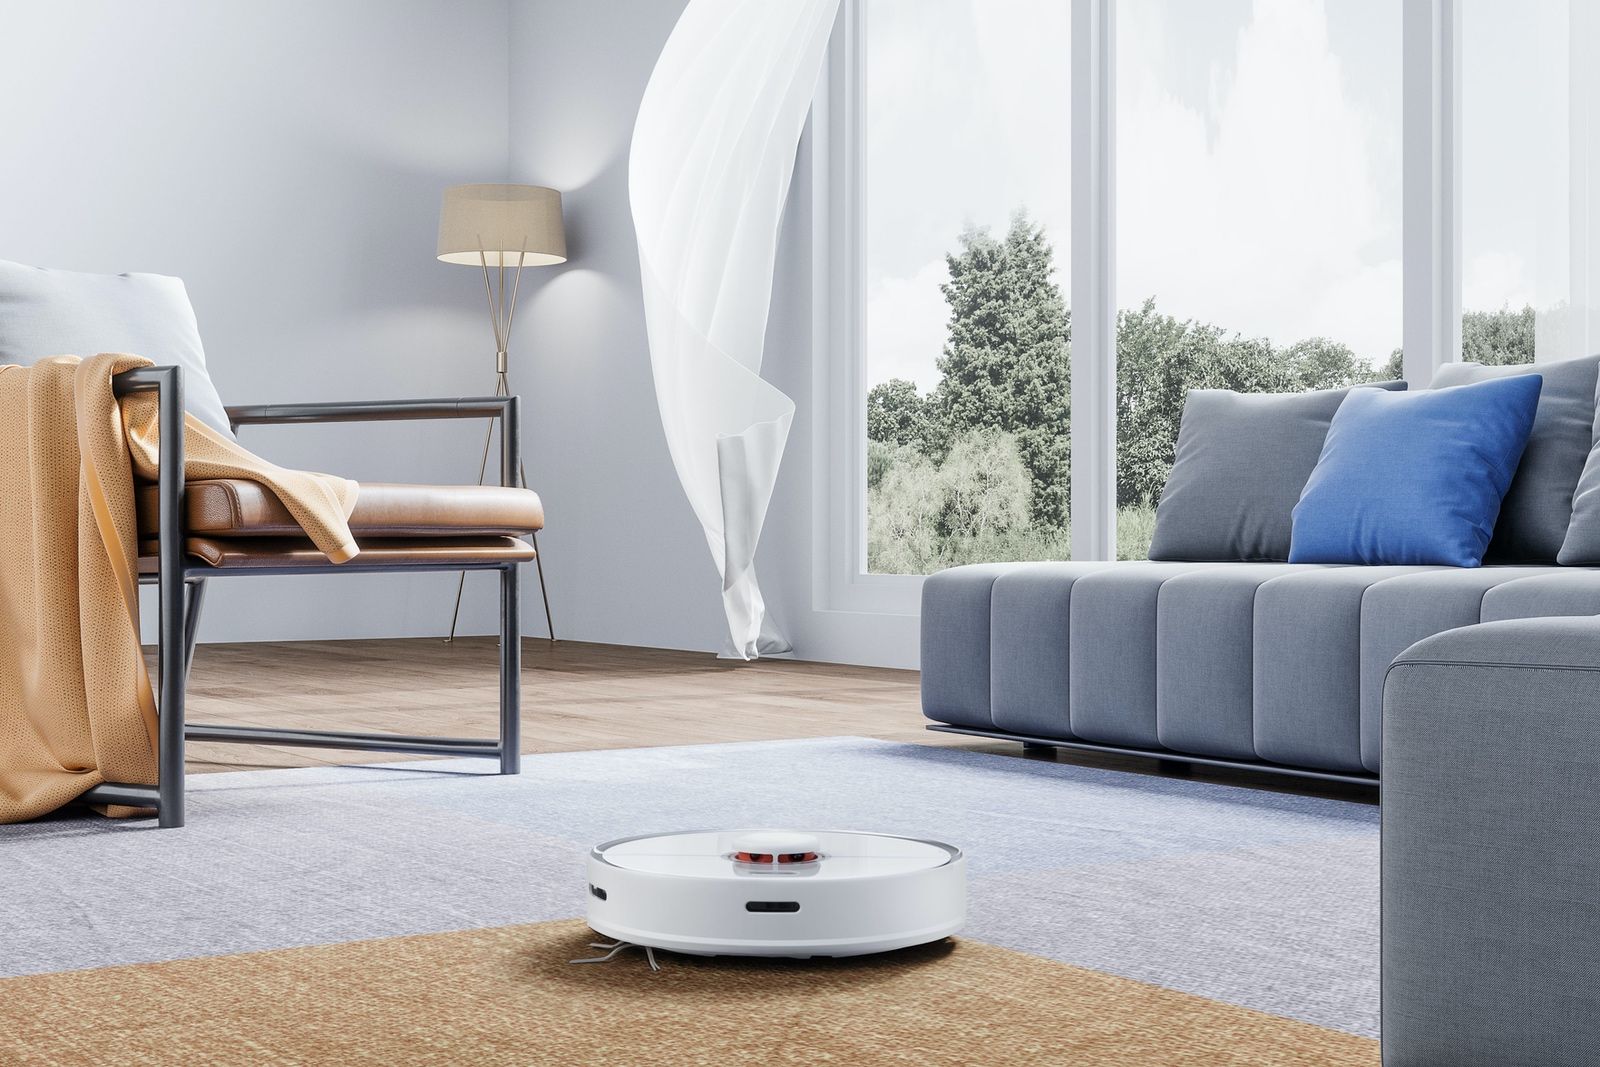 This Fathers day get 50 off the superb Roborock S5 Max robot vacuum image 4